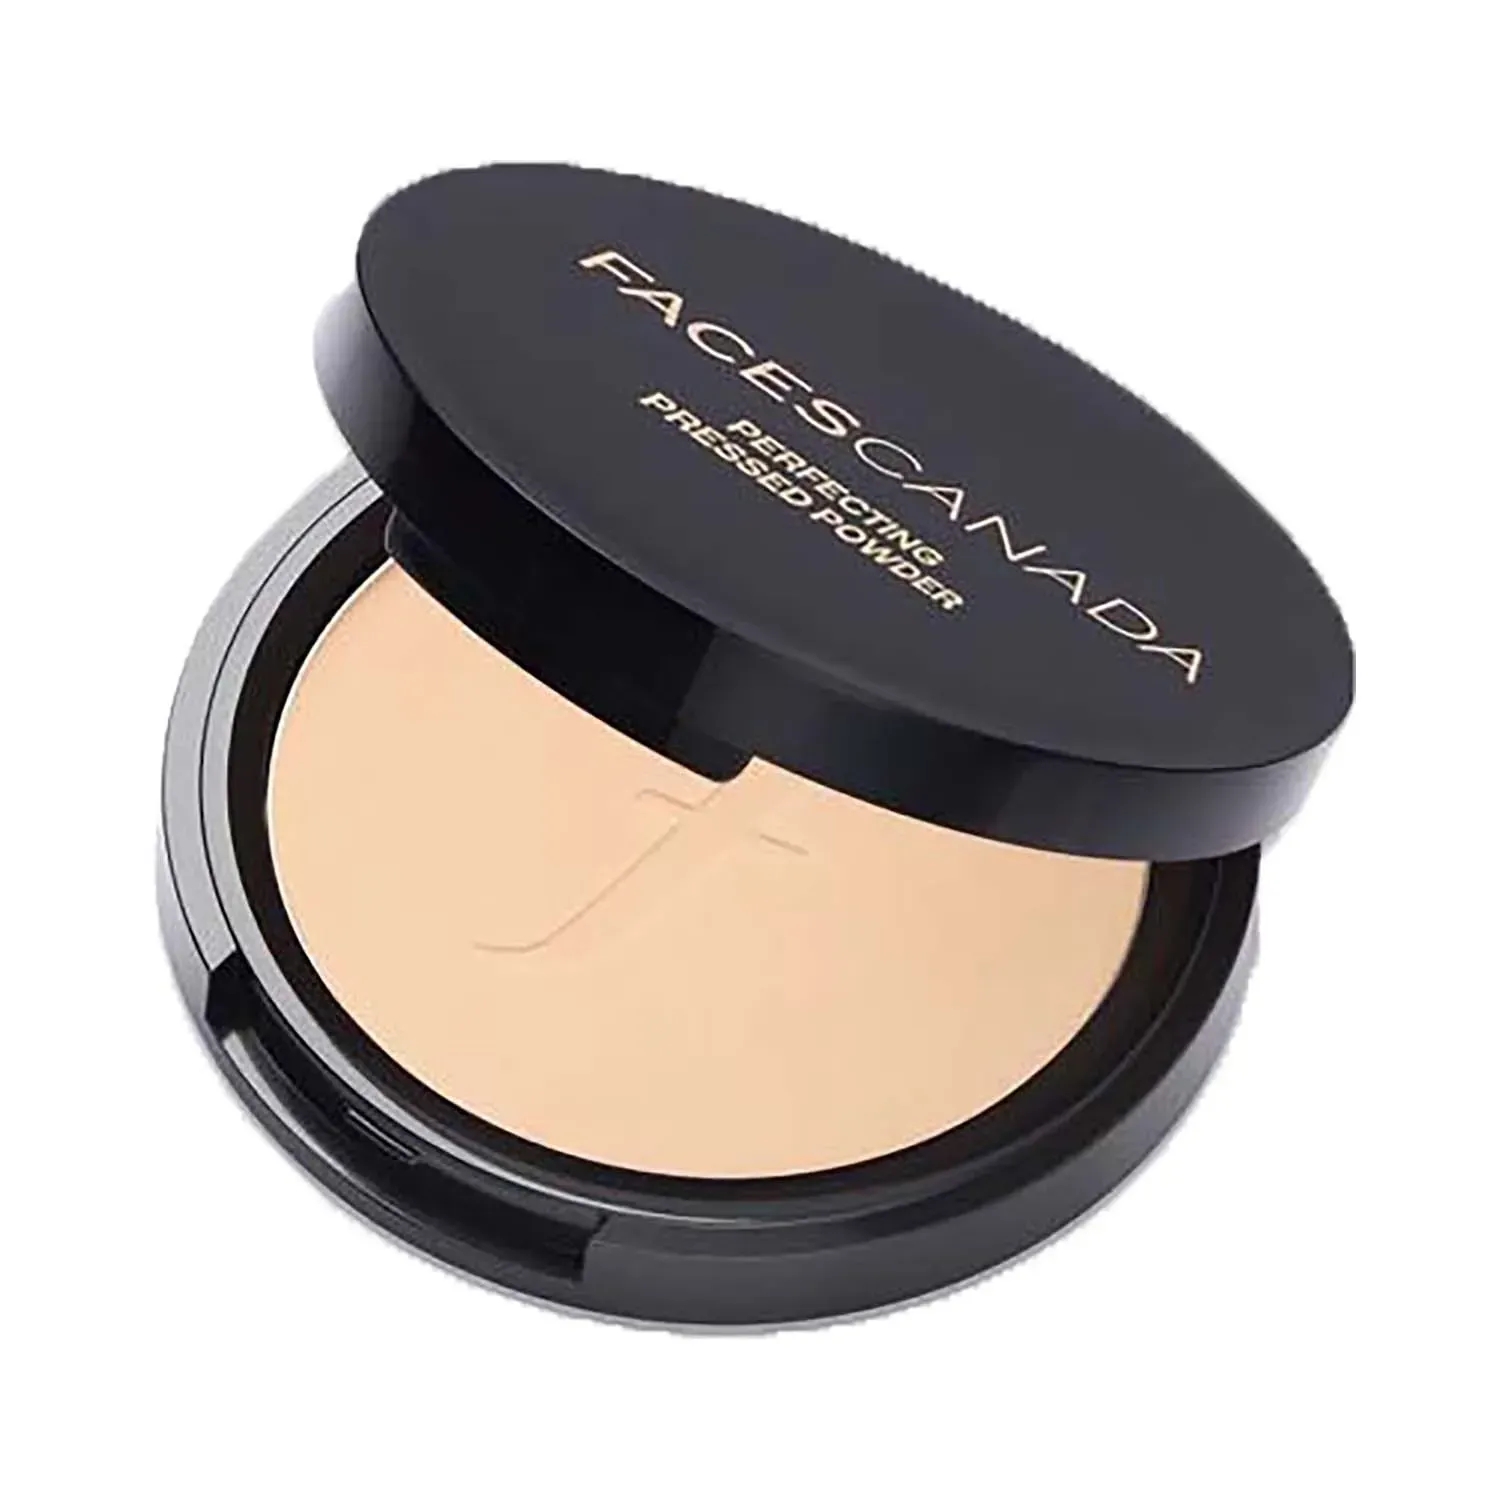 Faces Canada | Faces Canada Perfecting Pressed Powder - 01 Ivory (9g)